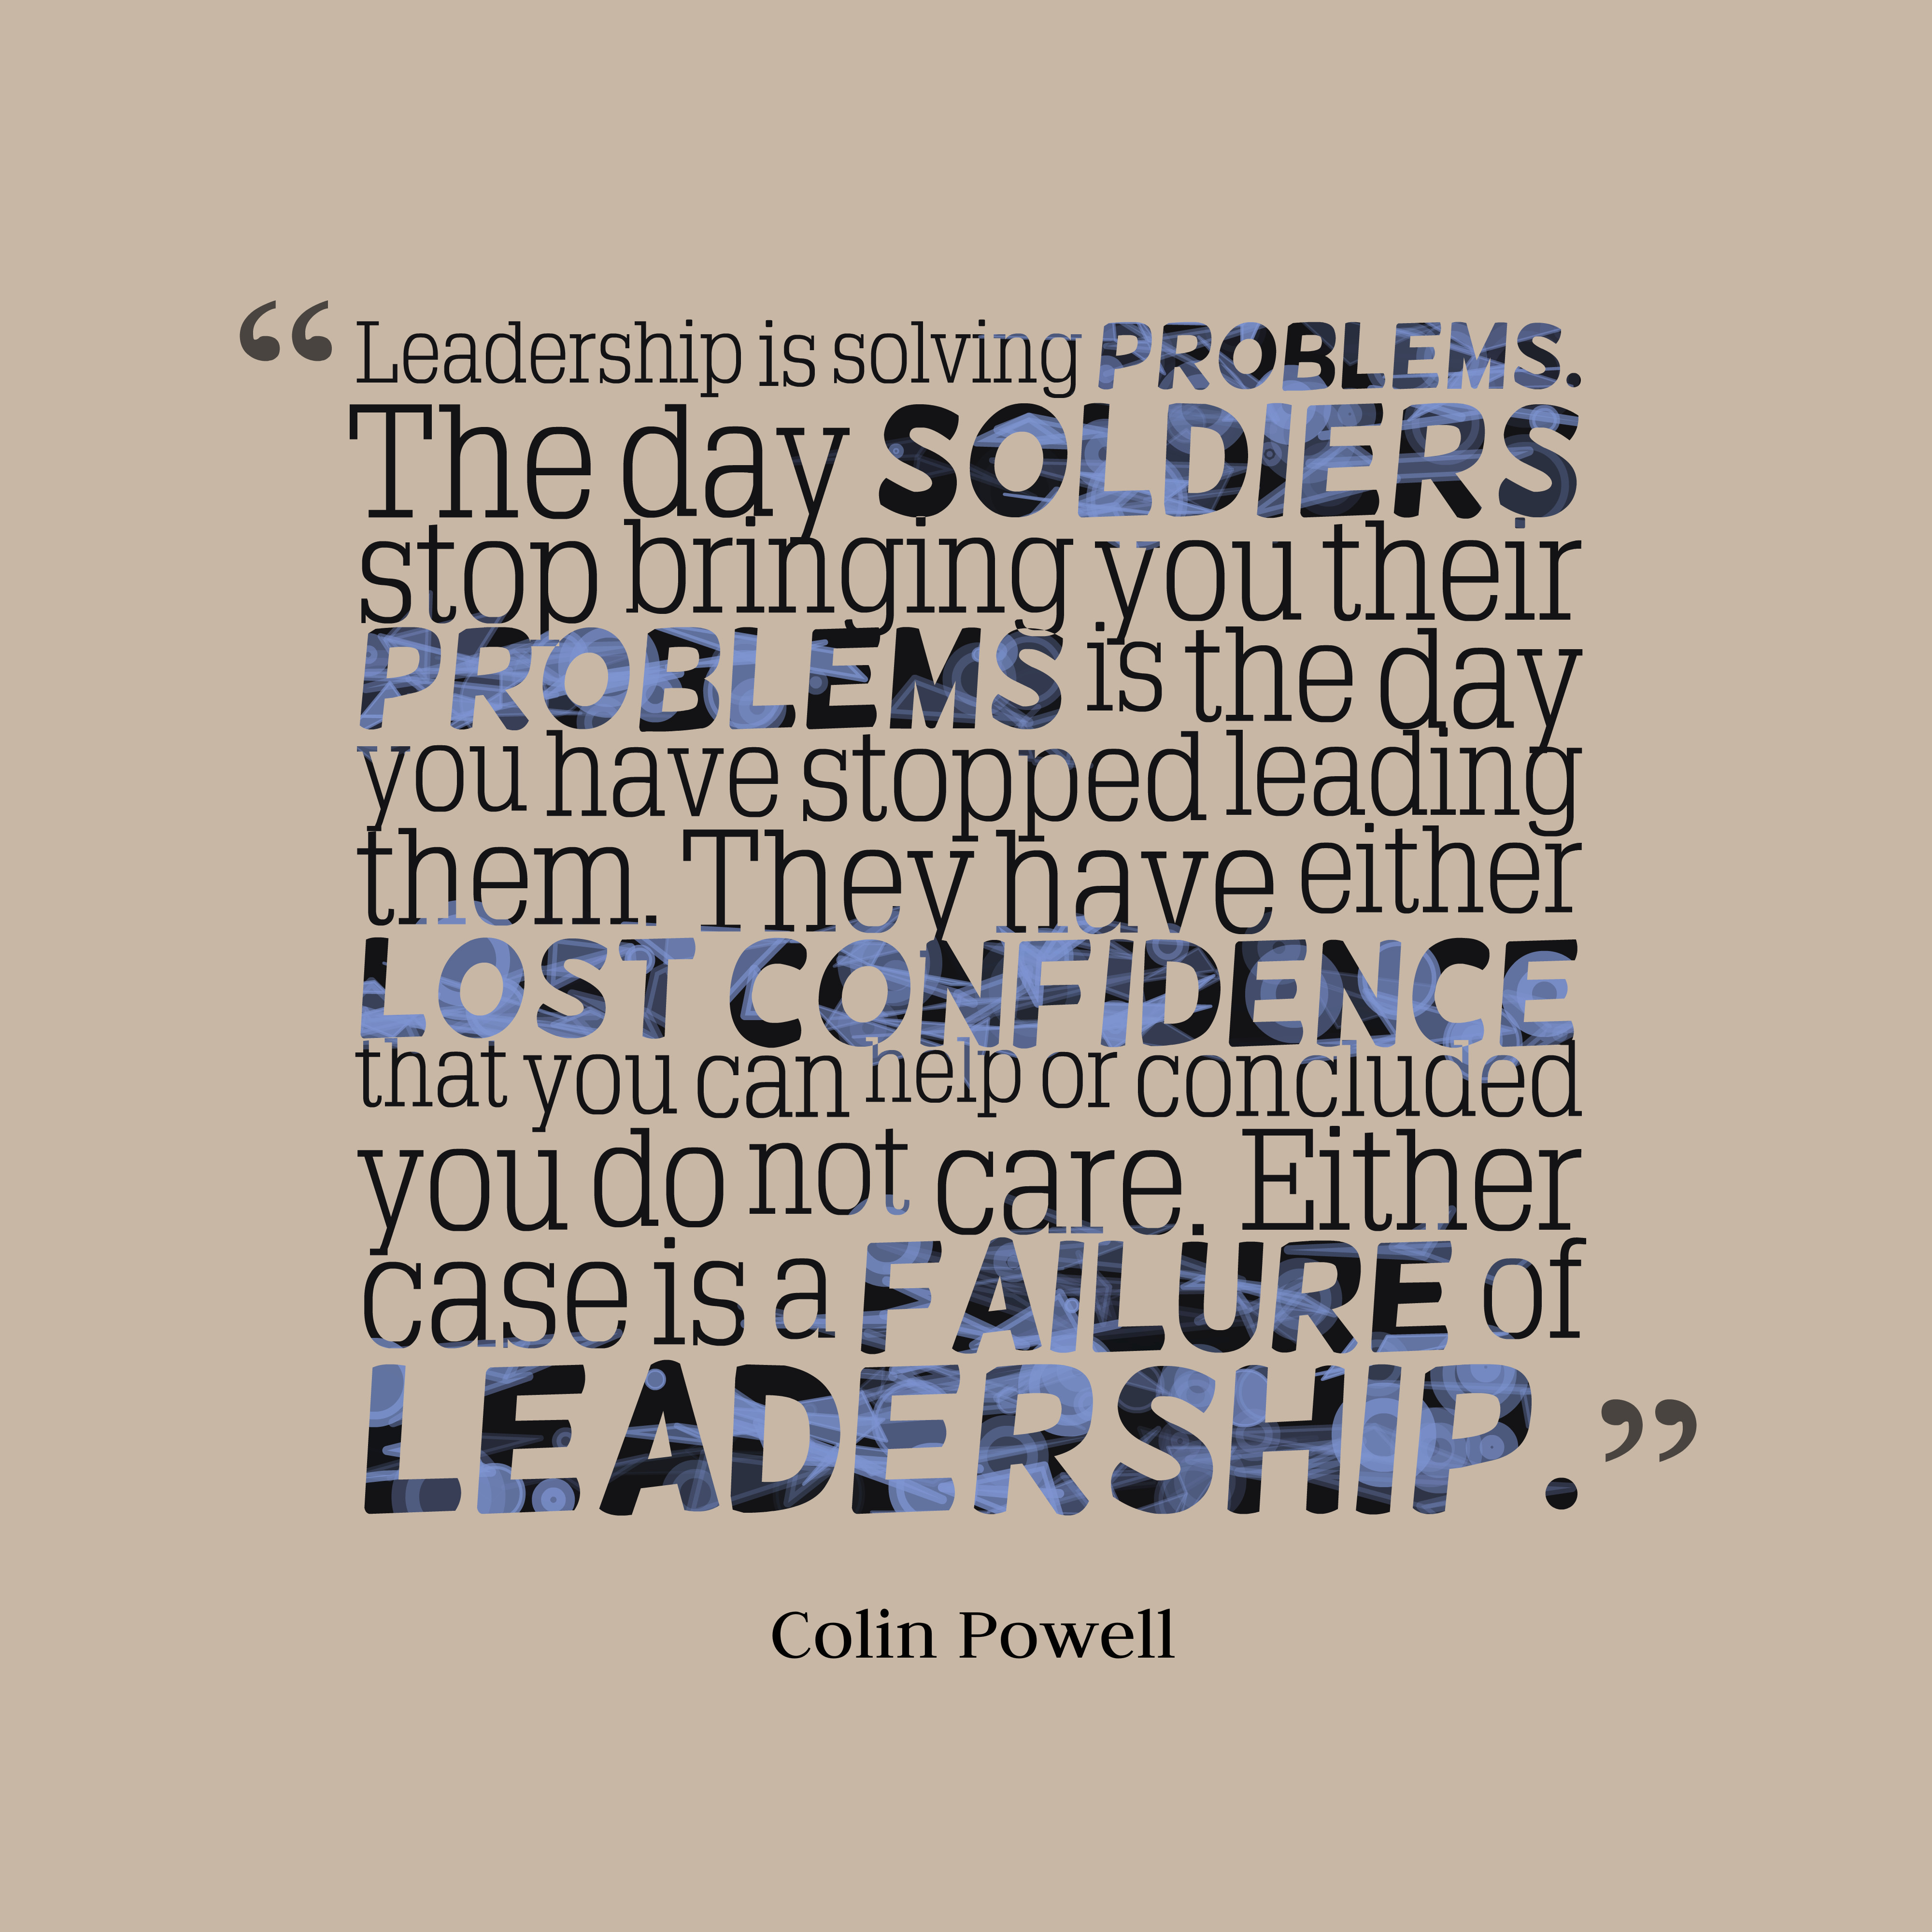 Colin Powell Quote Leadership
 Get high resolution using text from Colin Powell quote